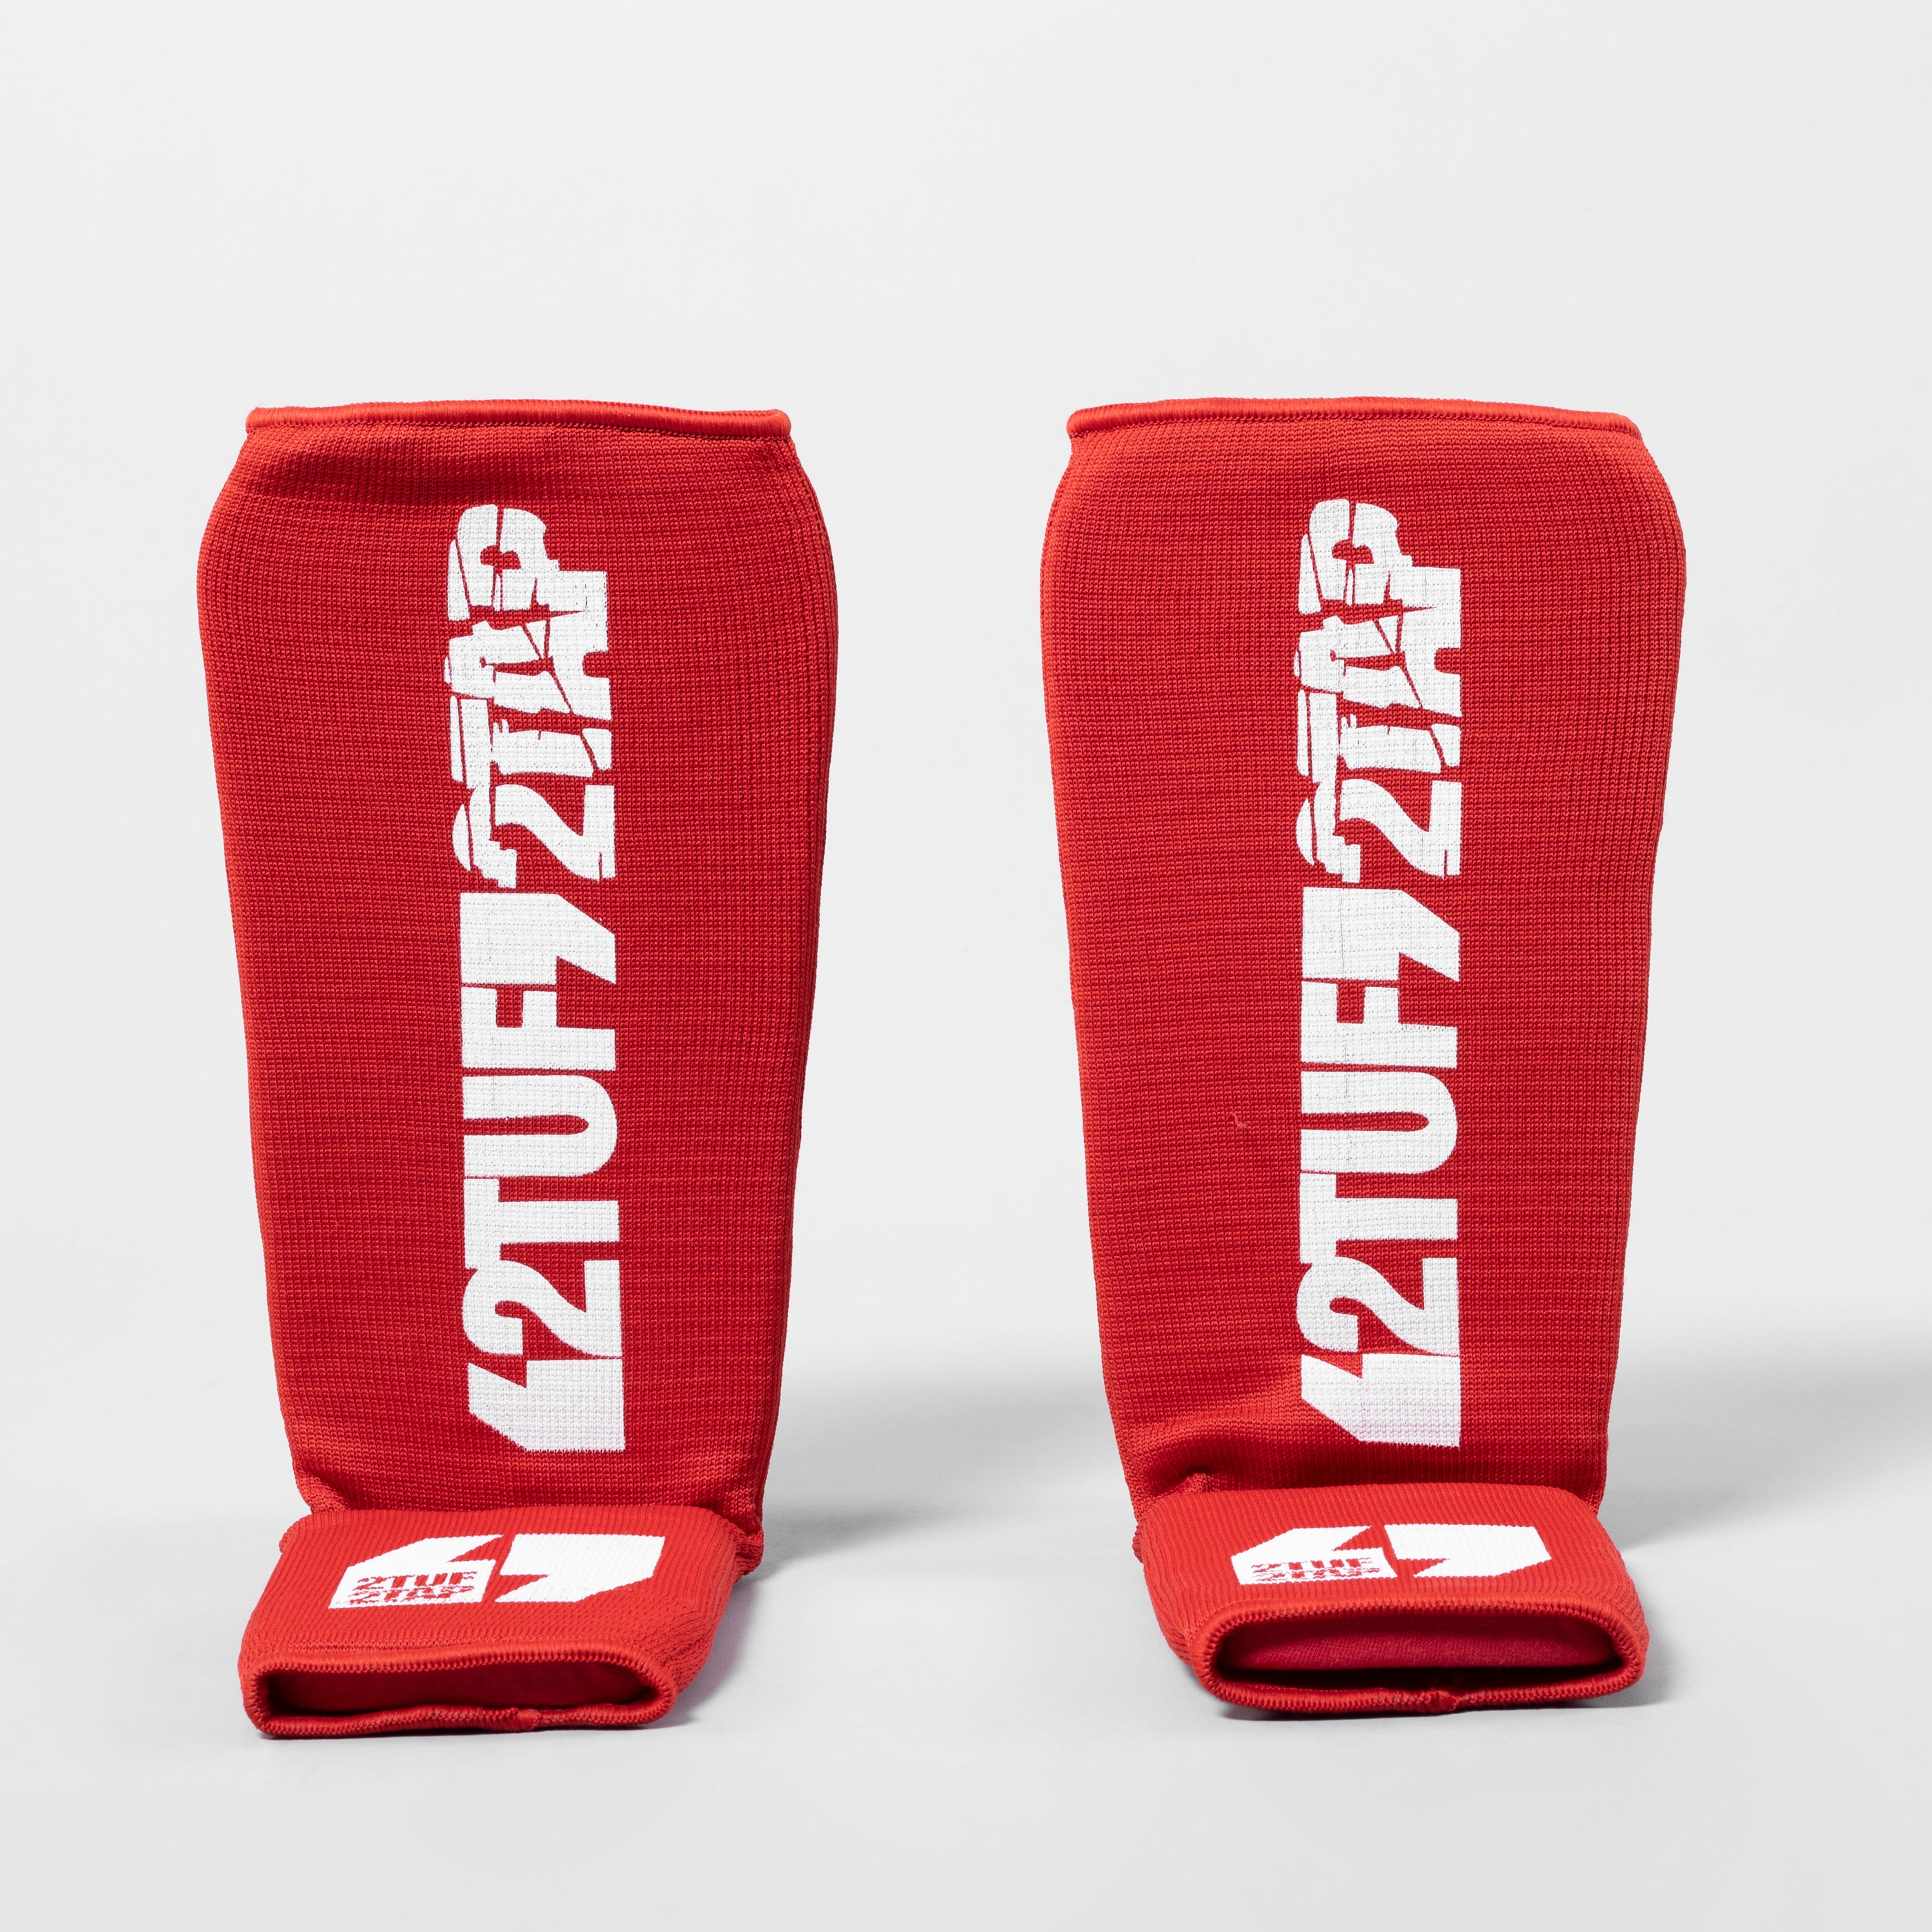 'Pro-Fit' Training Shin Instep Guards - Red/White 2TUF2TAP